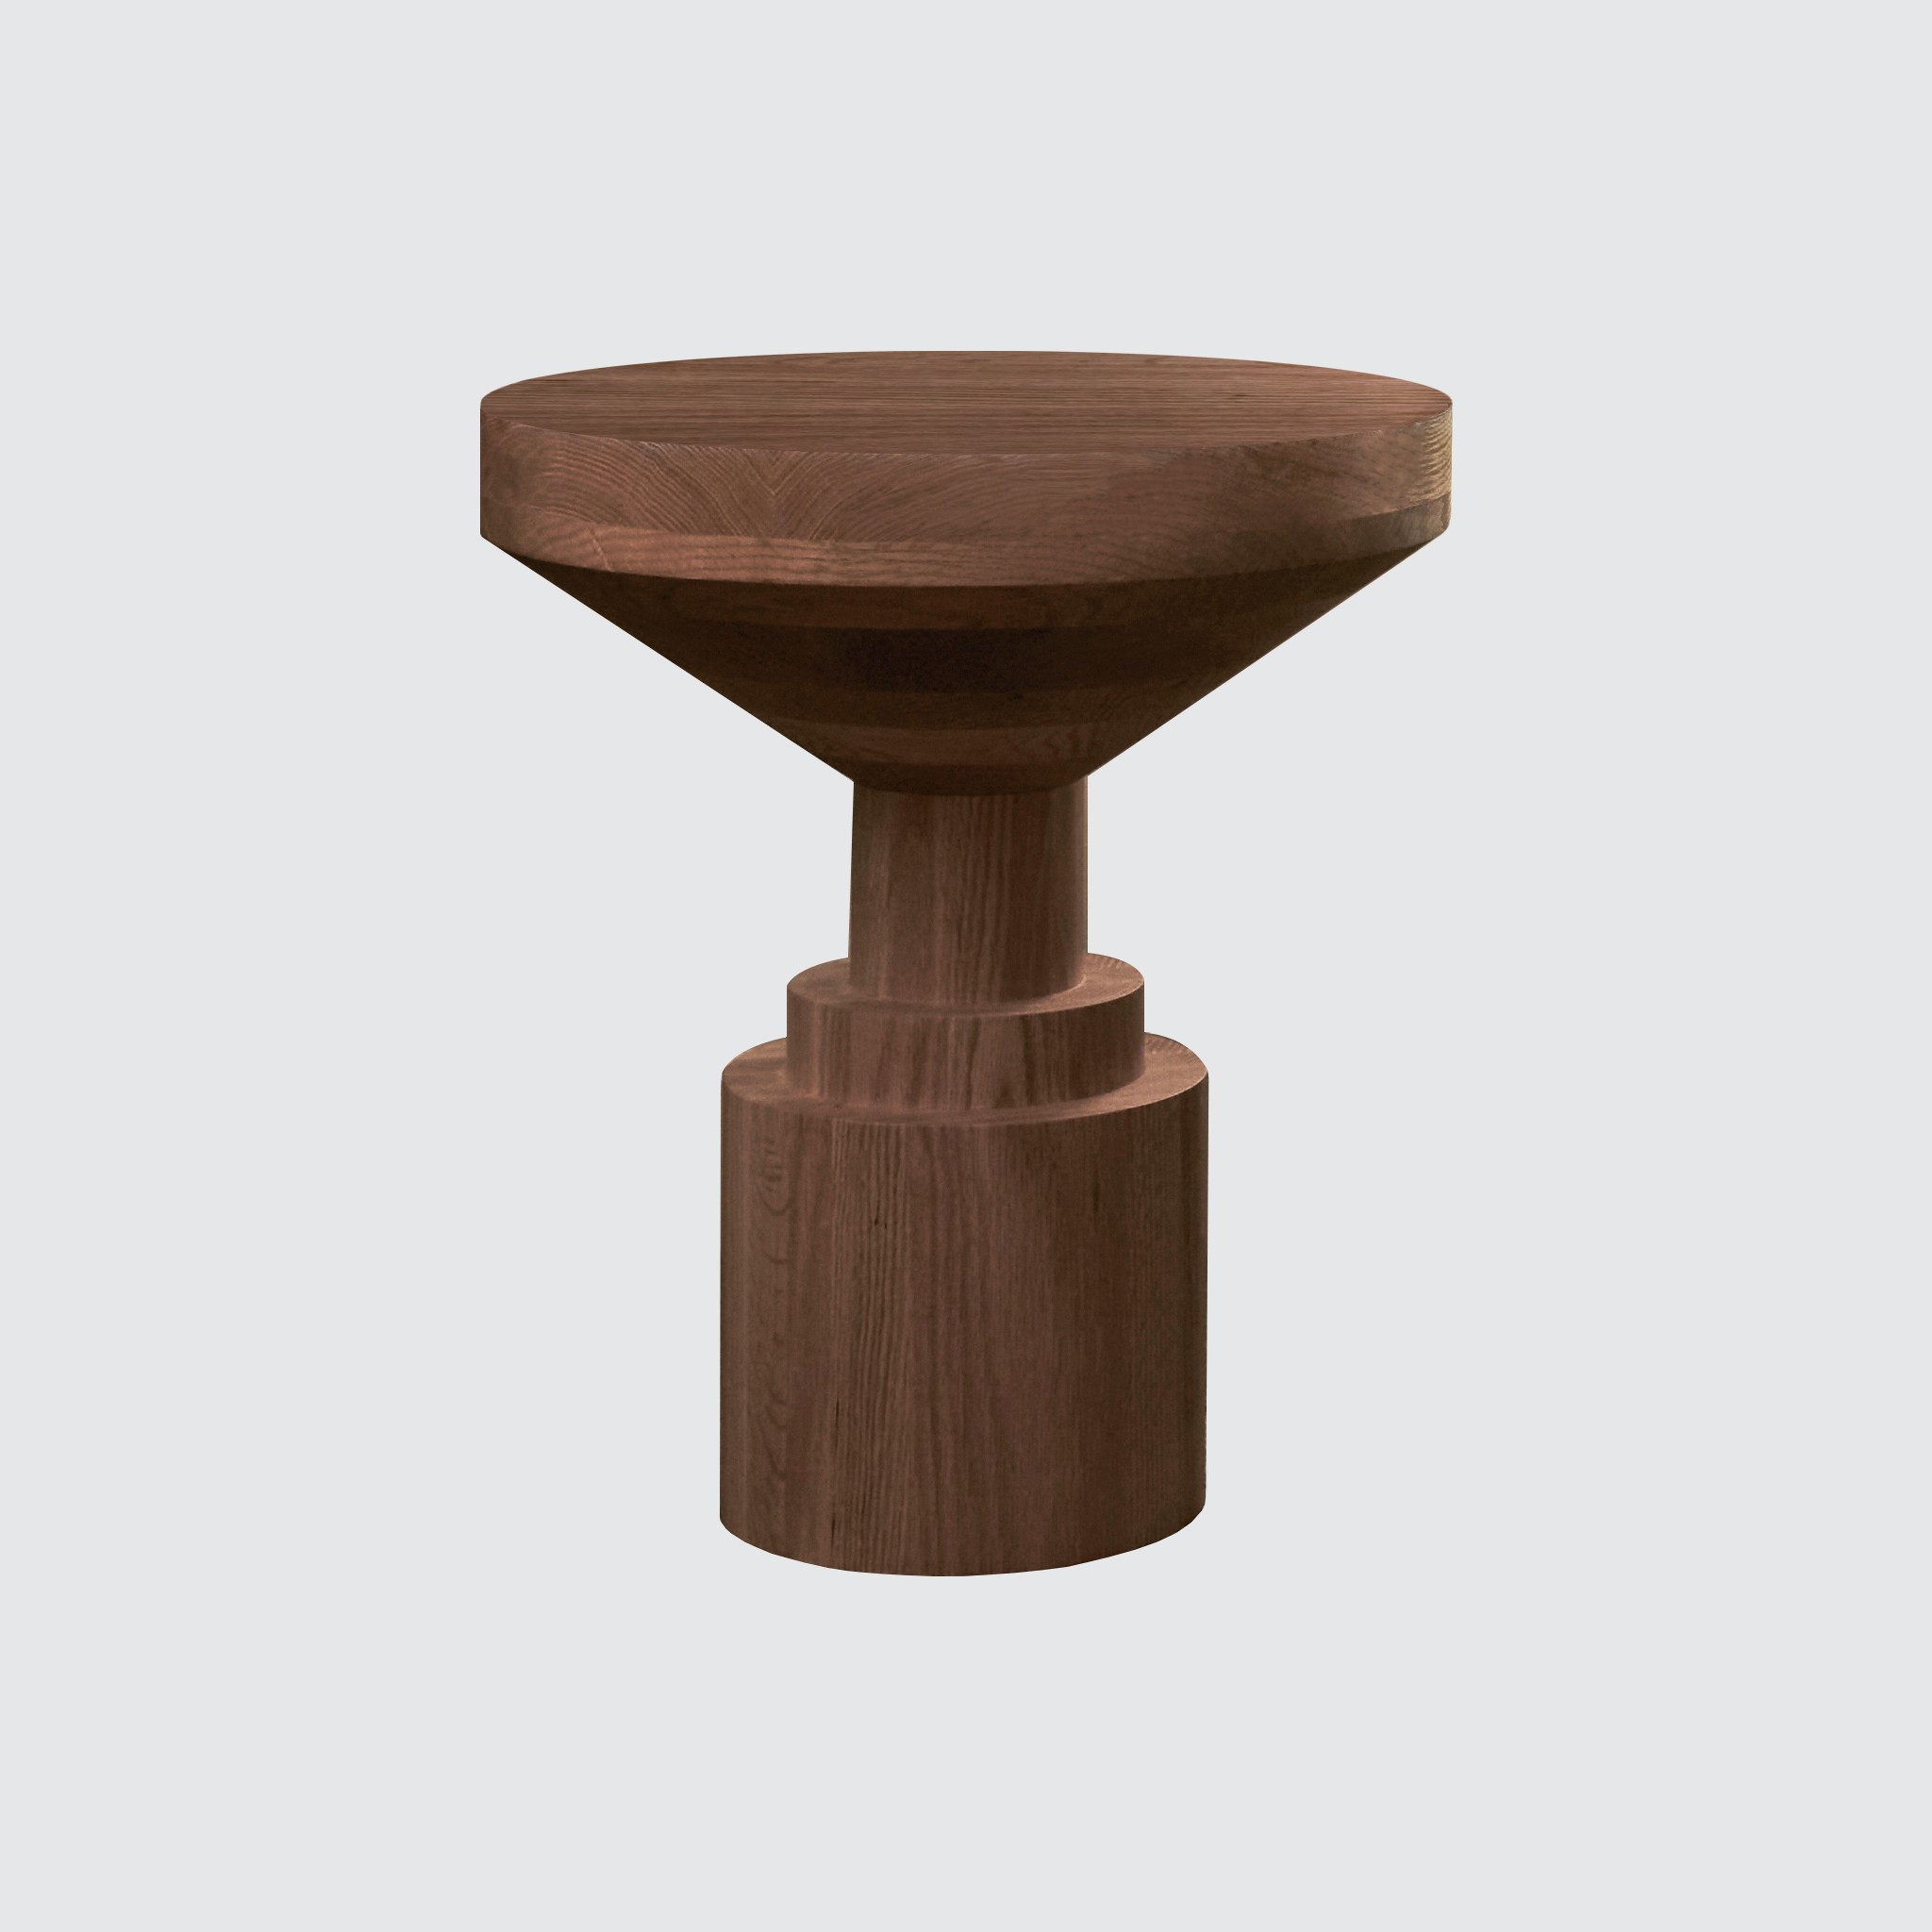 a wooden table with a round top